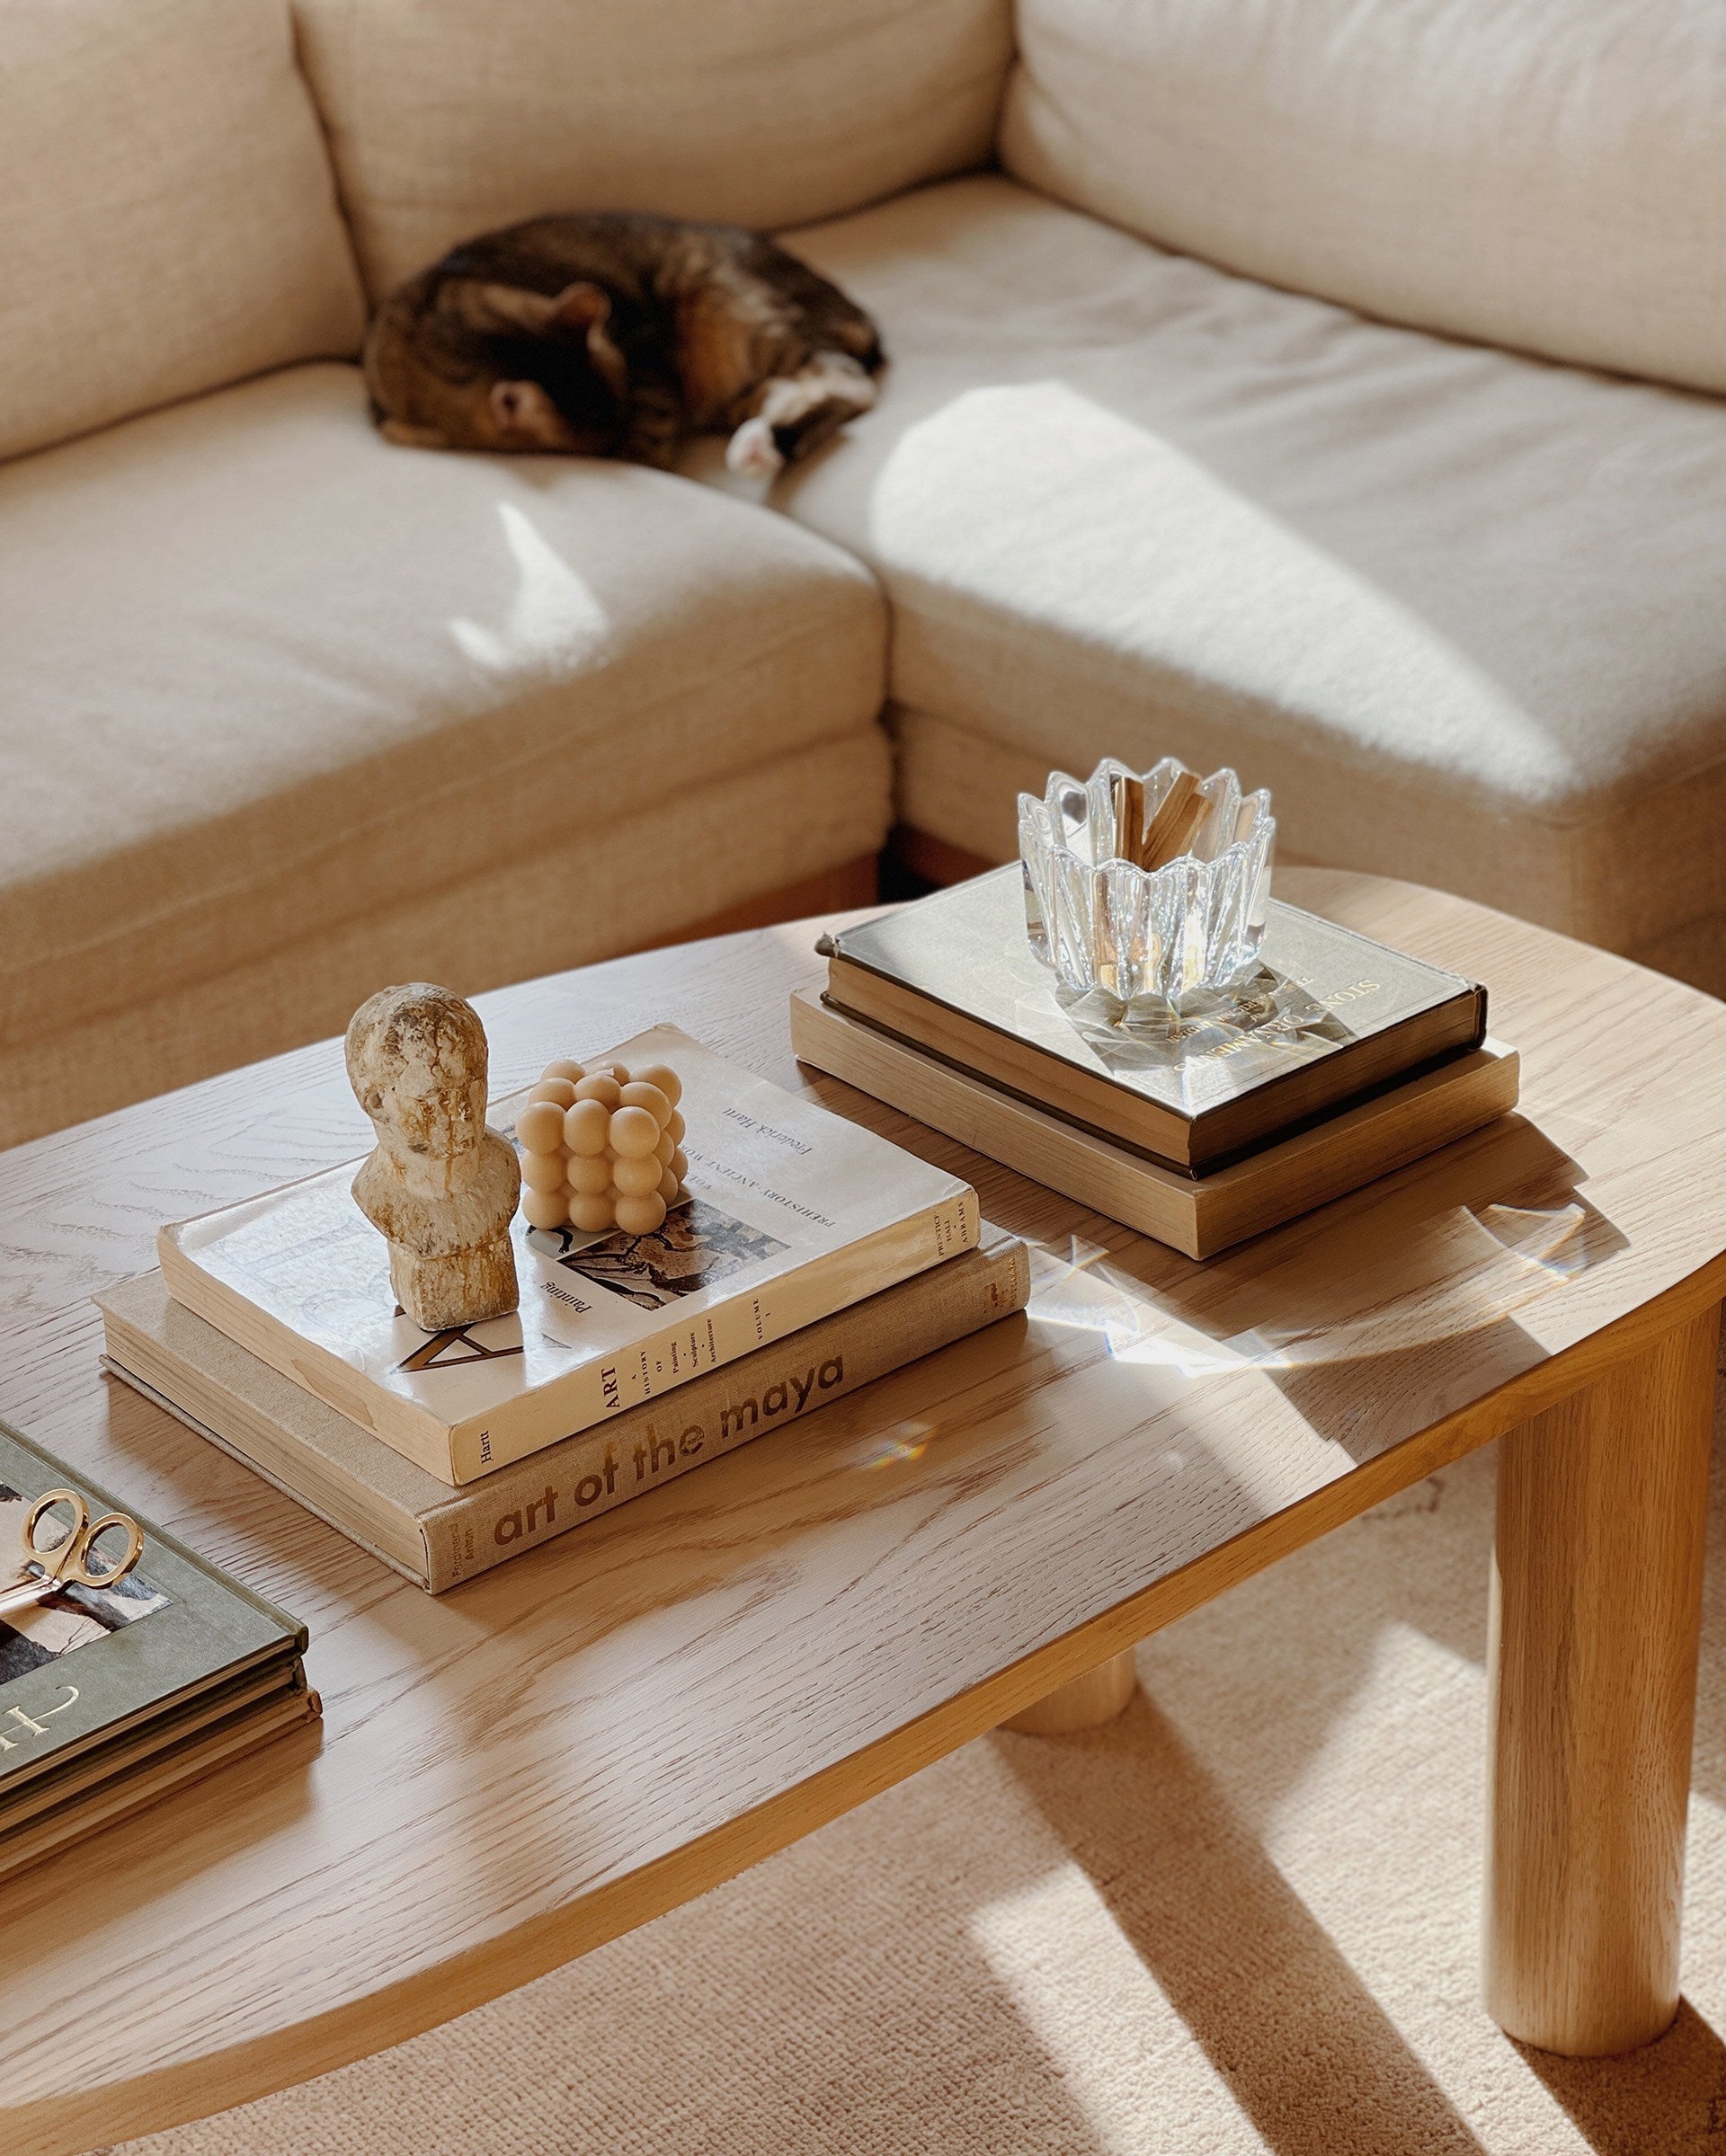 A cat is curled up on an ivory linen sectional sofa. A light wood oval coffee table is in front with stacks of books and decor.